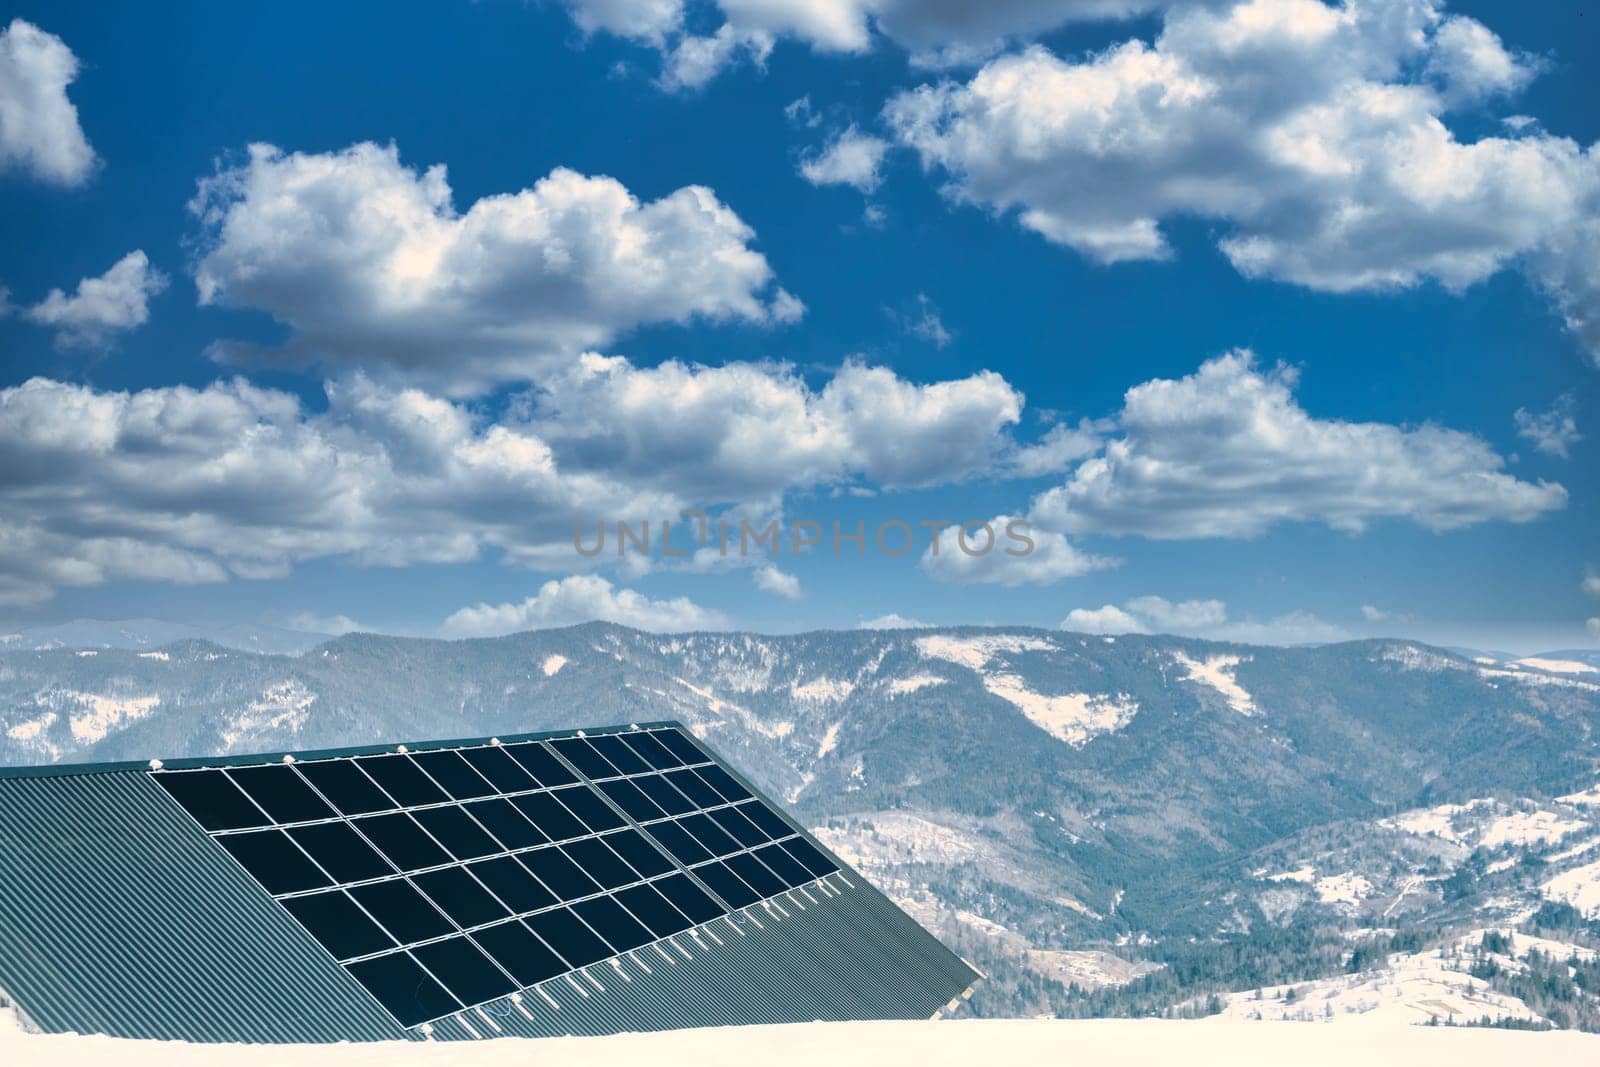 solar panels with the clouds sky. solar panels with sun reflection. background of photovoltaic modules for renewable energy high in mountains. download